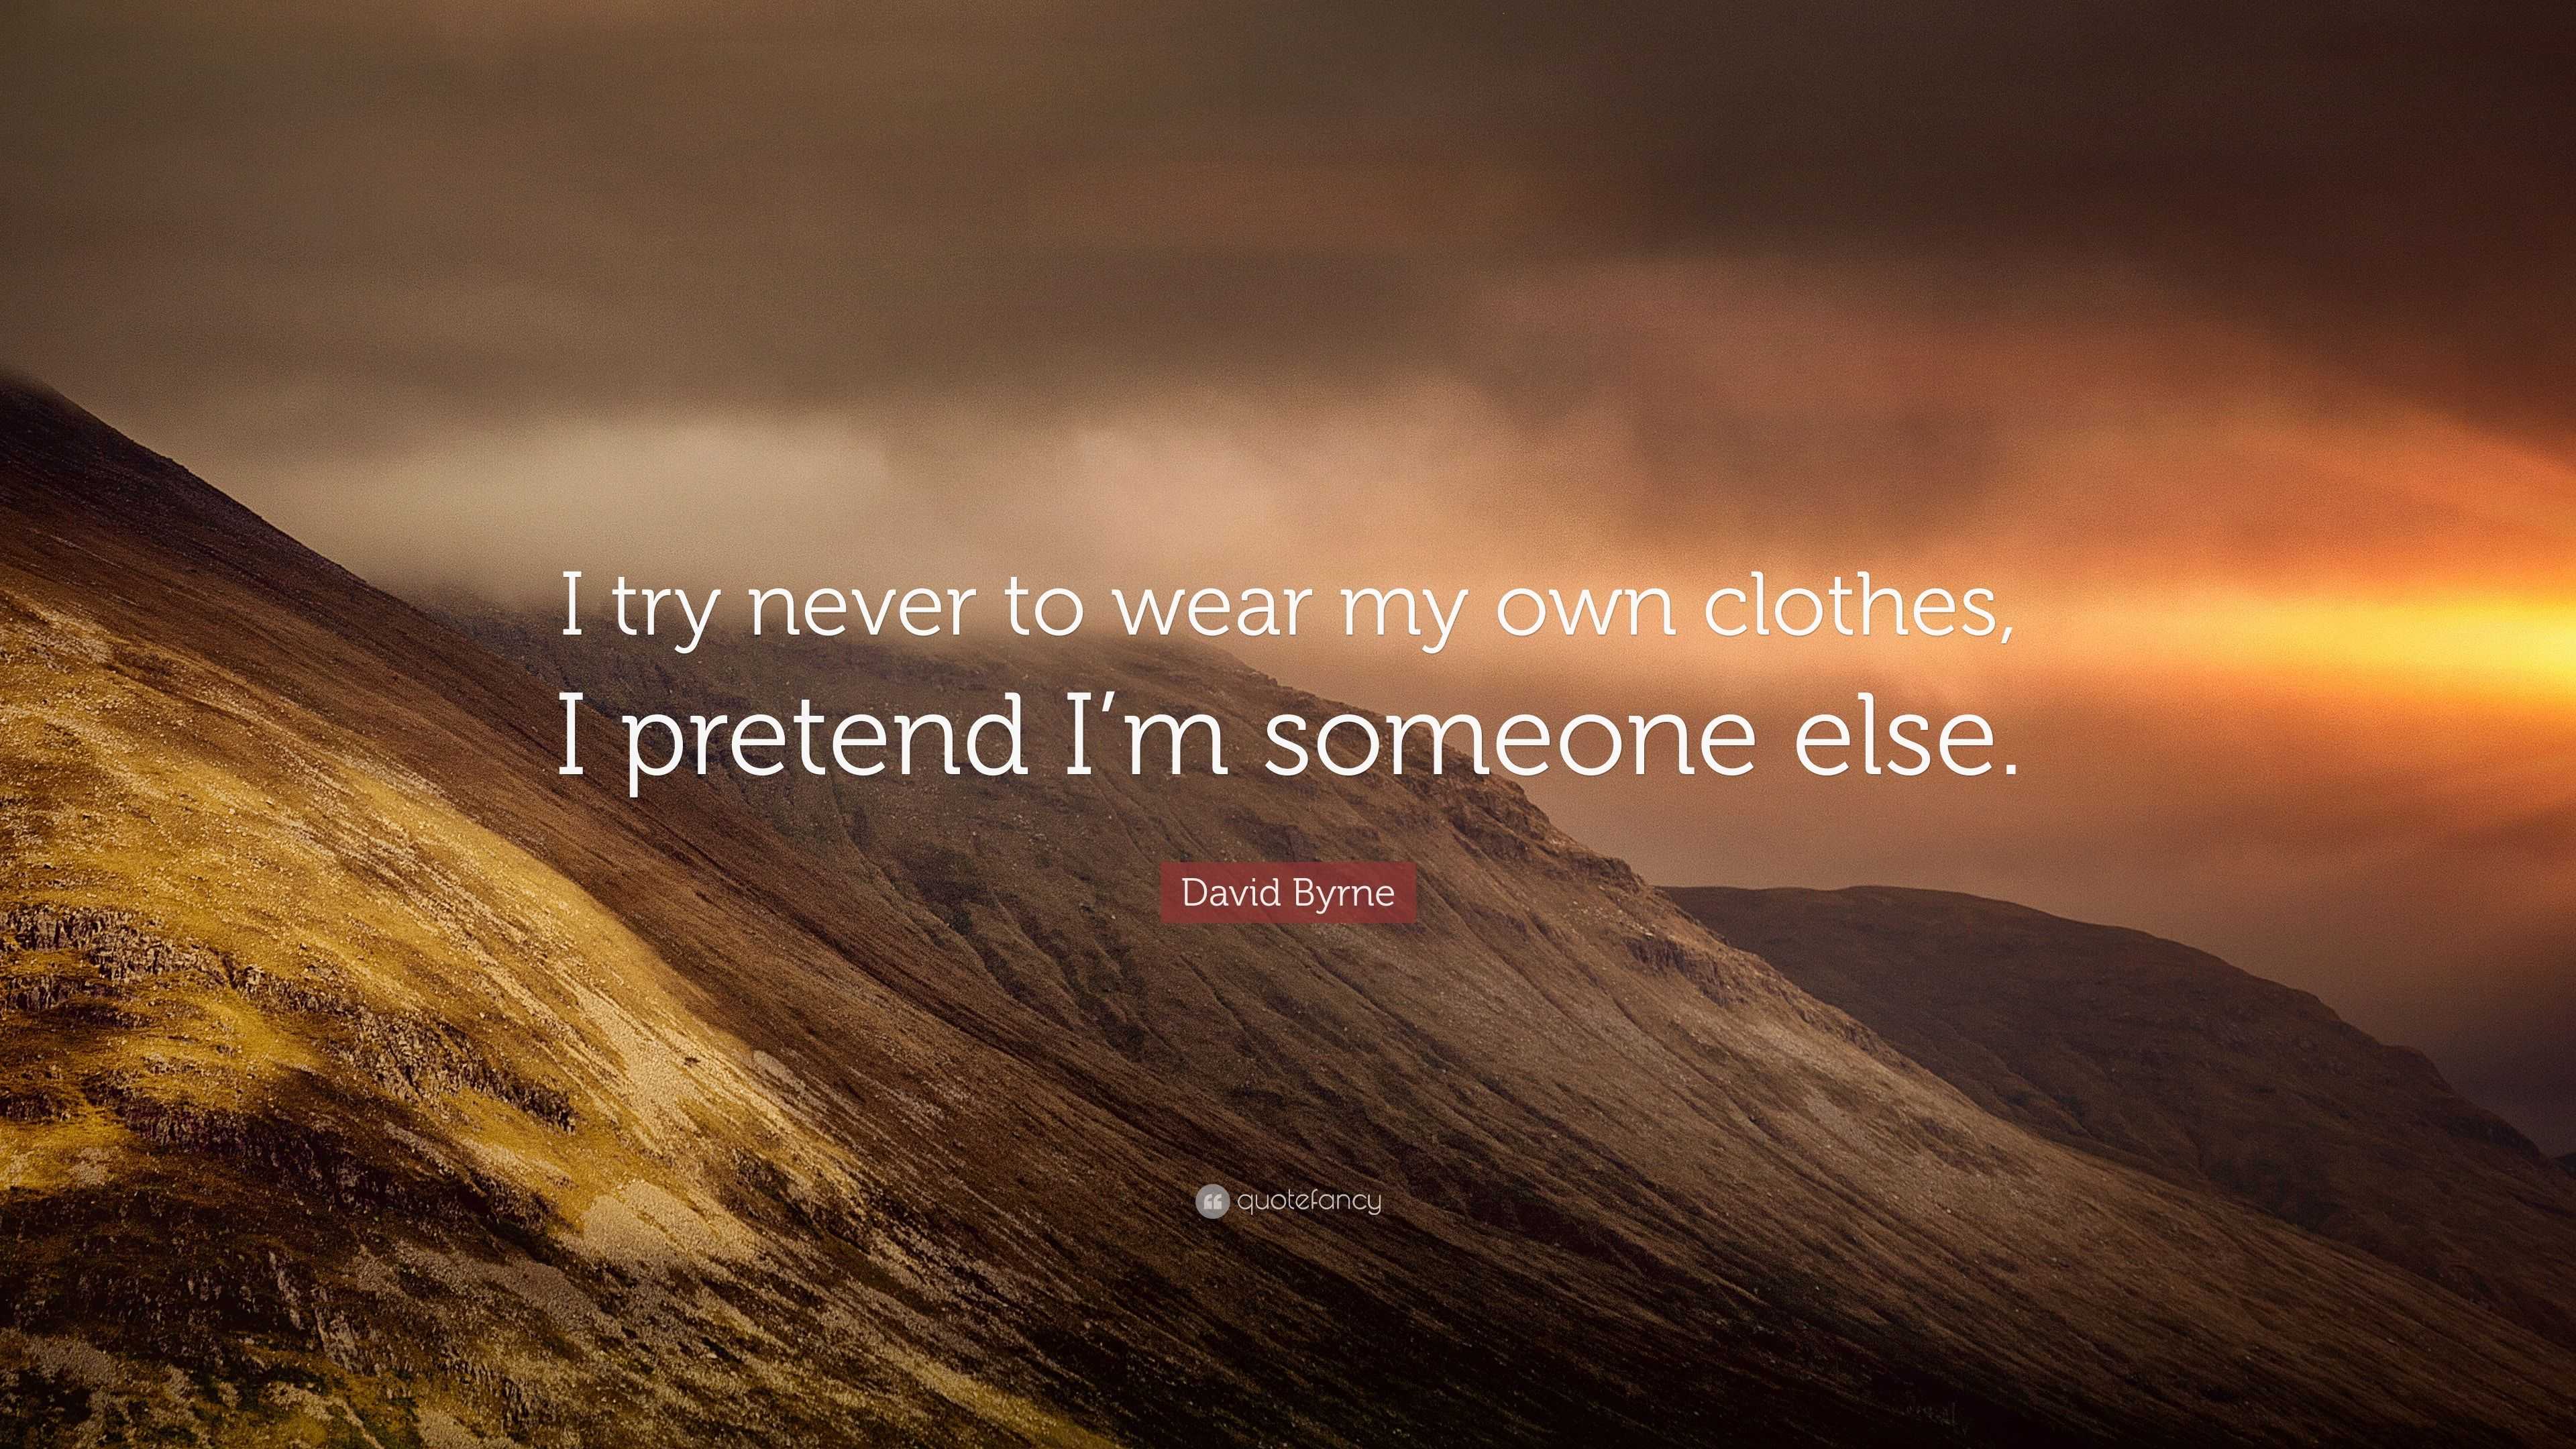 David Byrne Quote: “I try never to wear my own clothes, I pretend I’m ...